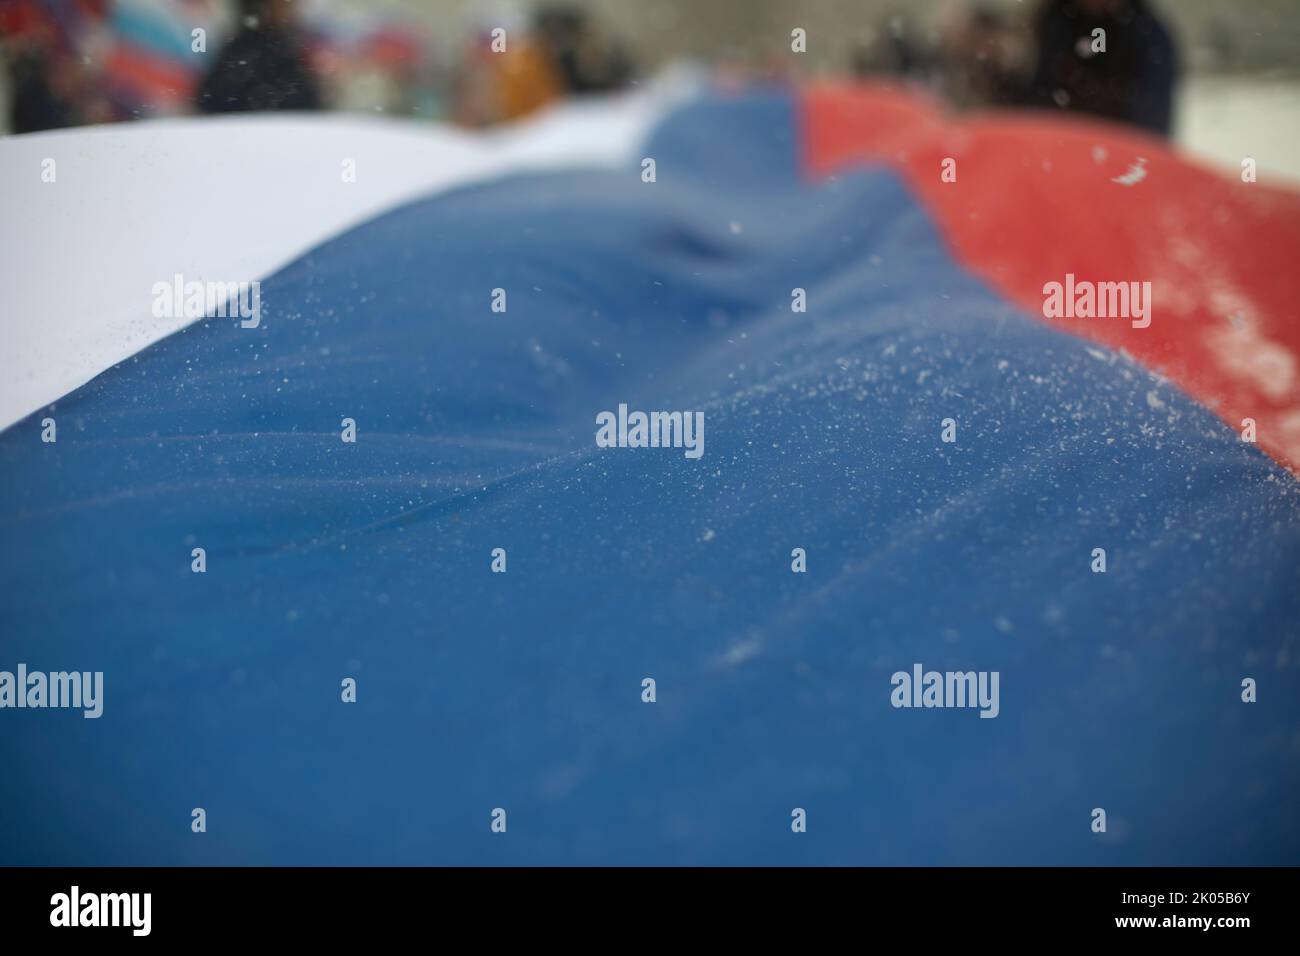 Flag of Russia in winter. Large cloth made of fabric. Symbol of state power in Russian Federation. Big rally in support of government. Stock Photo